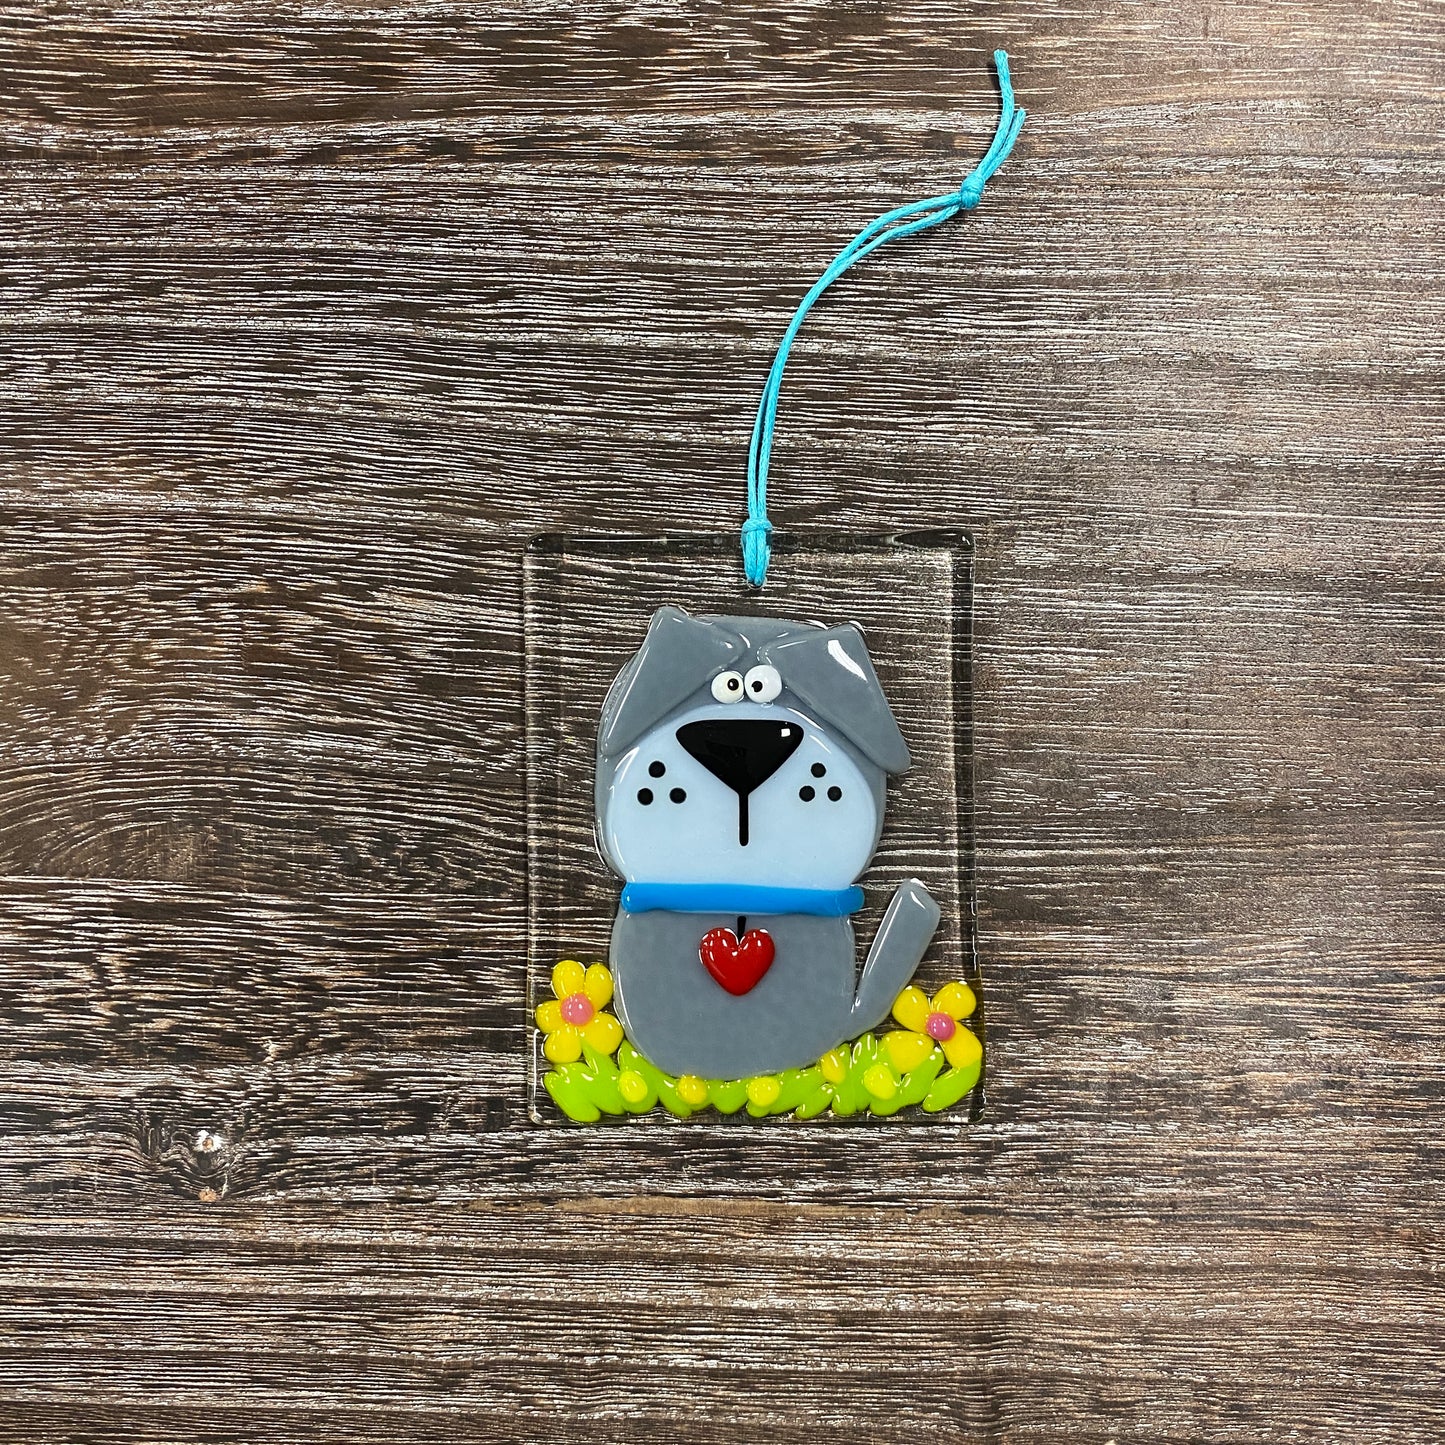 Fused Glass Suncatcher Ornament - Dog - Gray with Yellow Flowers